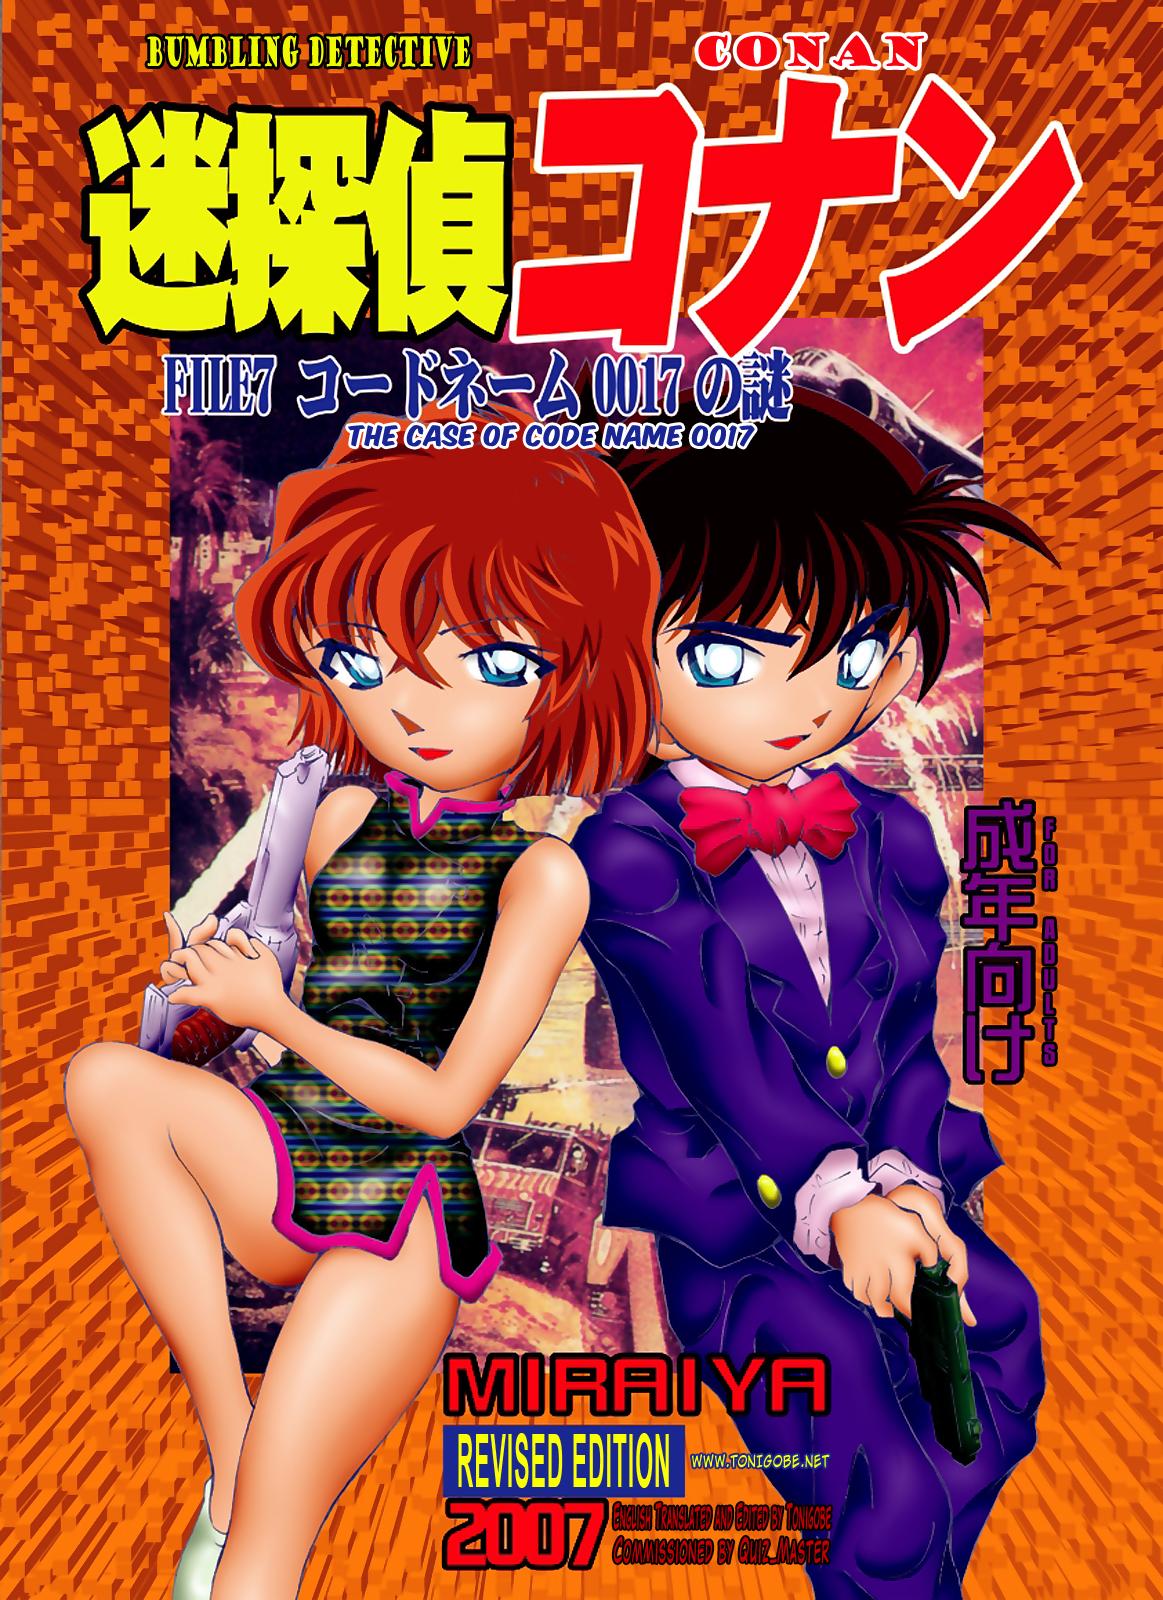 Maledom Bumbling Detective Conan - File 7: The Case of Code Name 0017 - Detective conan Body - Page 1